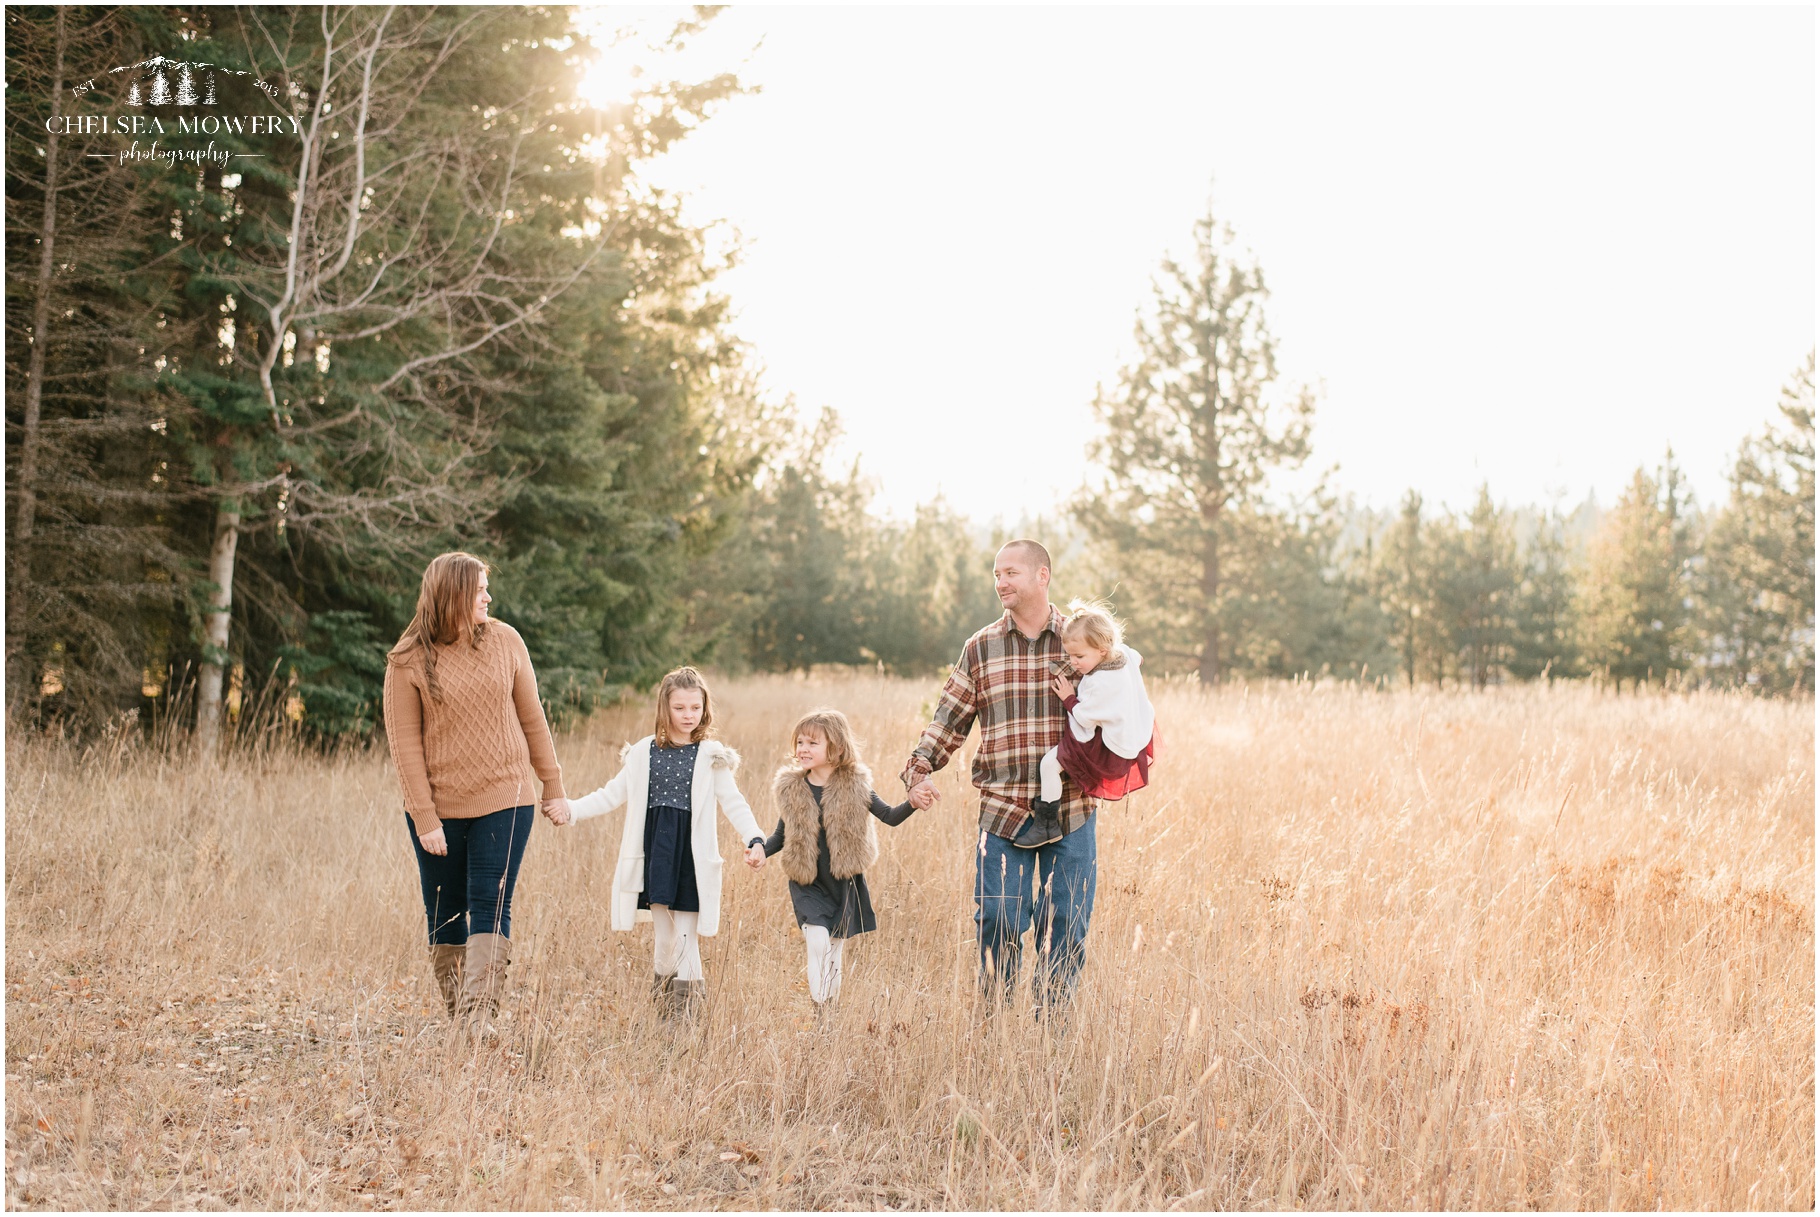 fun family pictures | lifestyle portrait photography